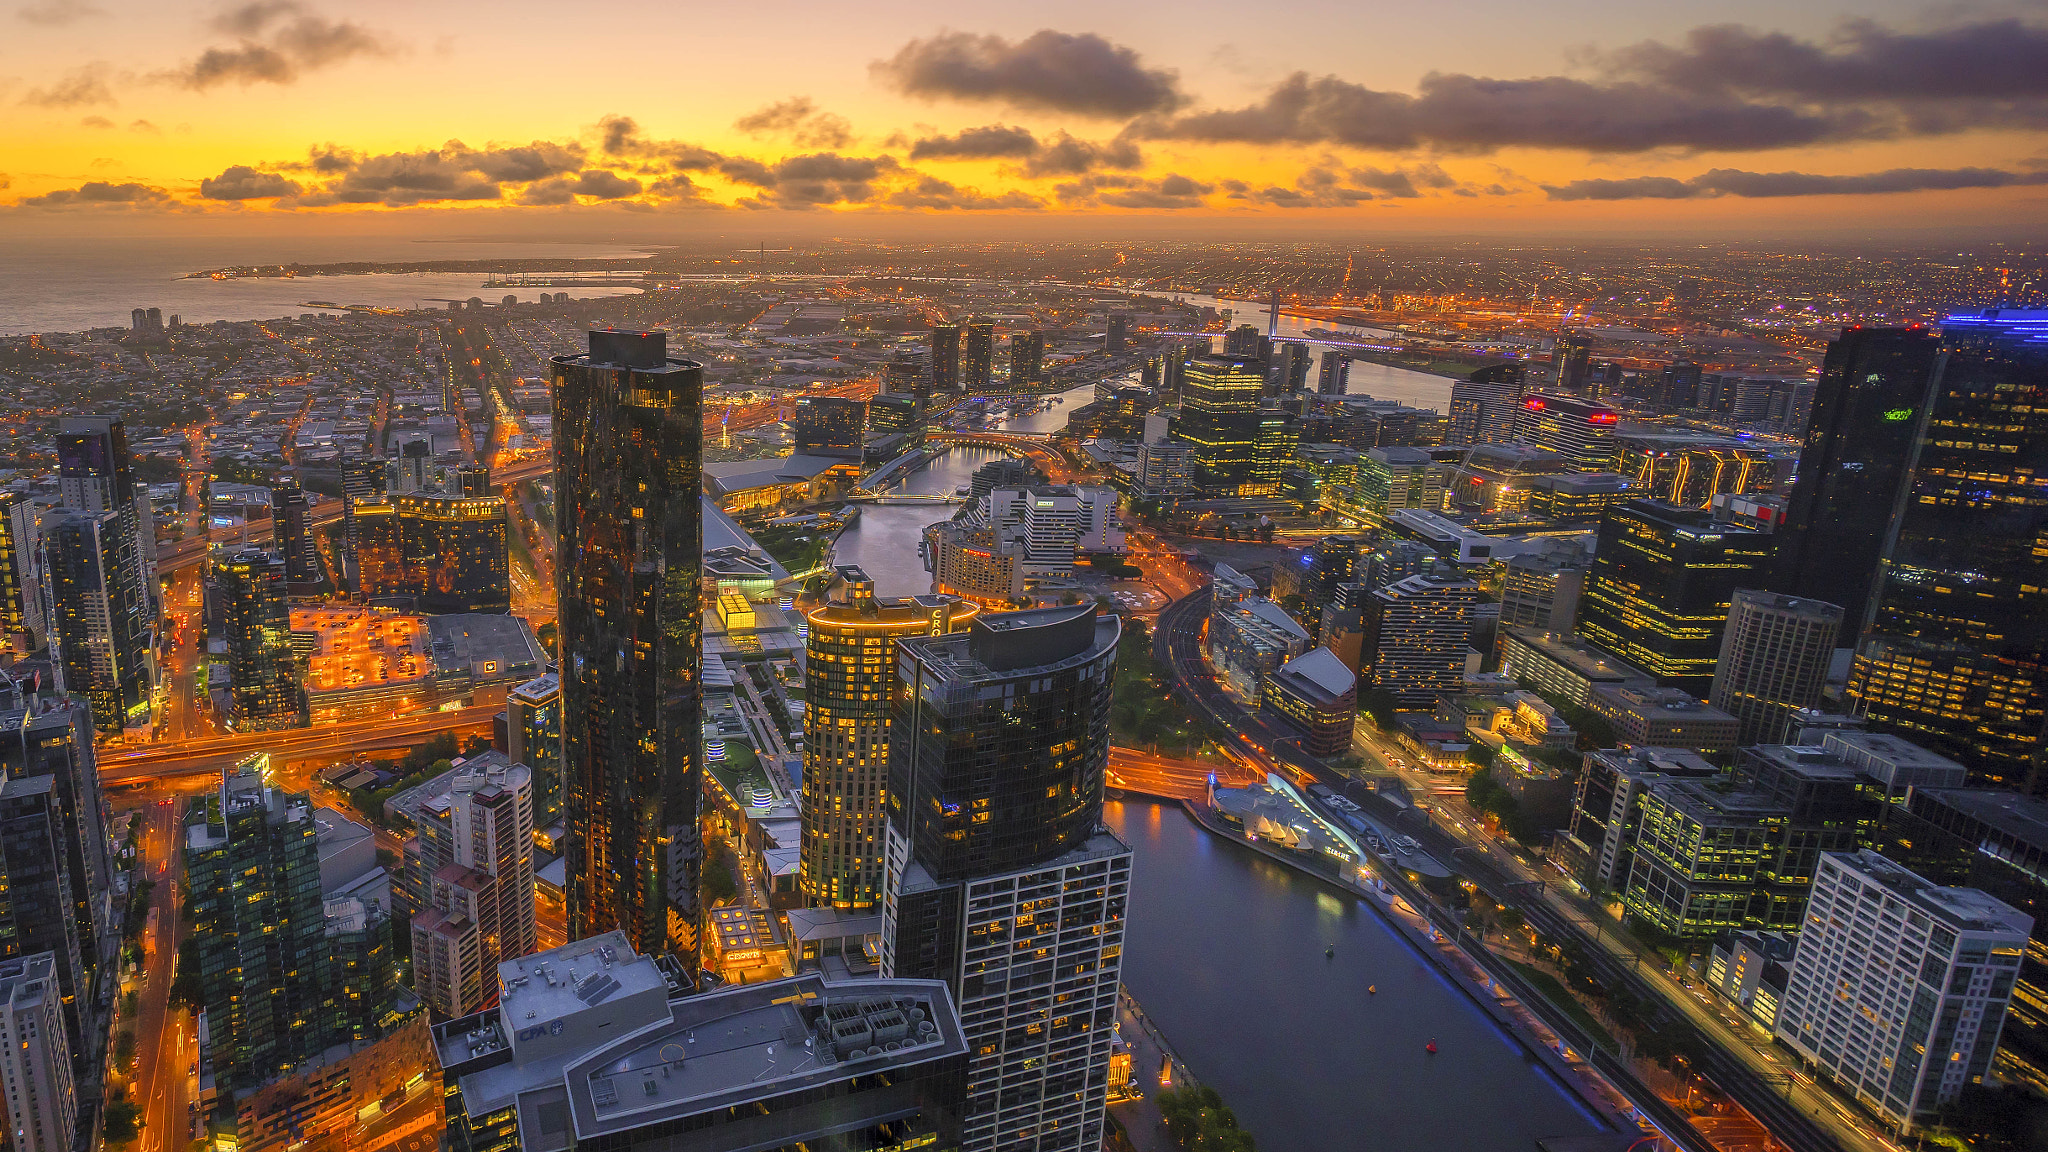 Sony a7R sample photo. Aerial view of dramatic sunset at melbourne city skyline photography